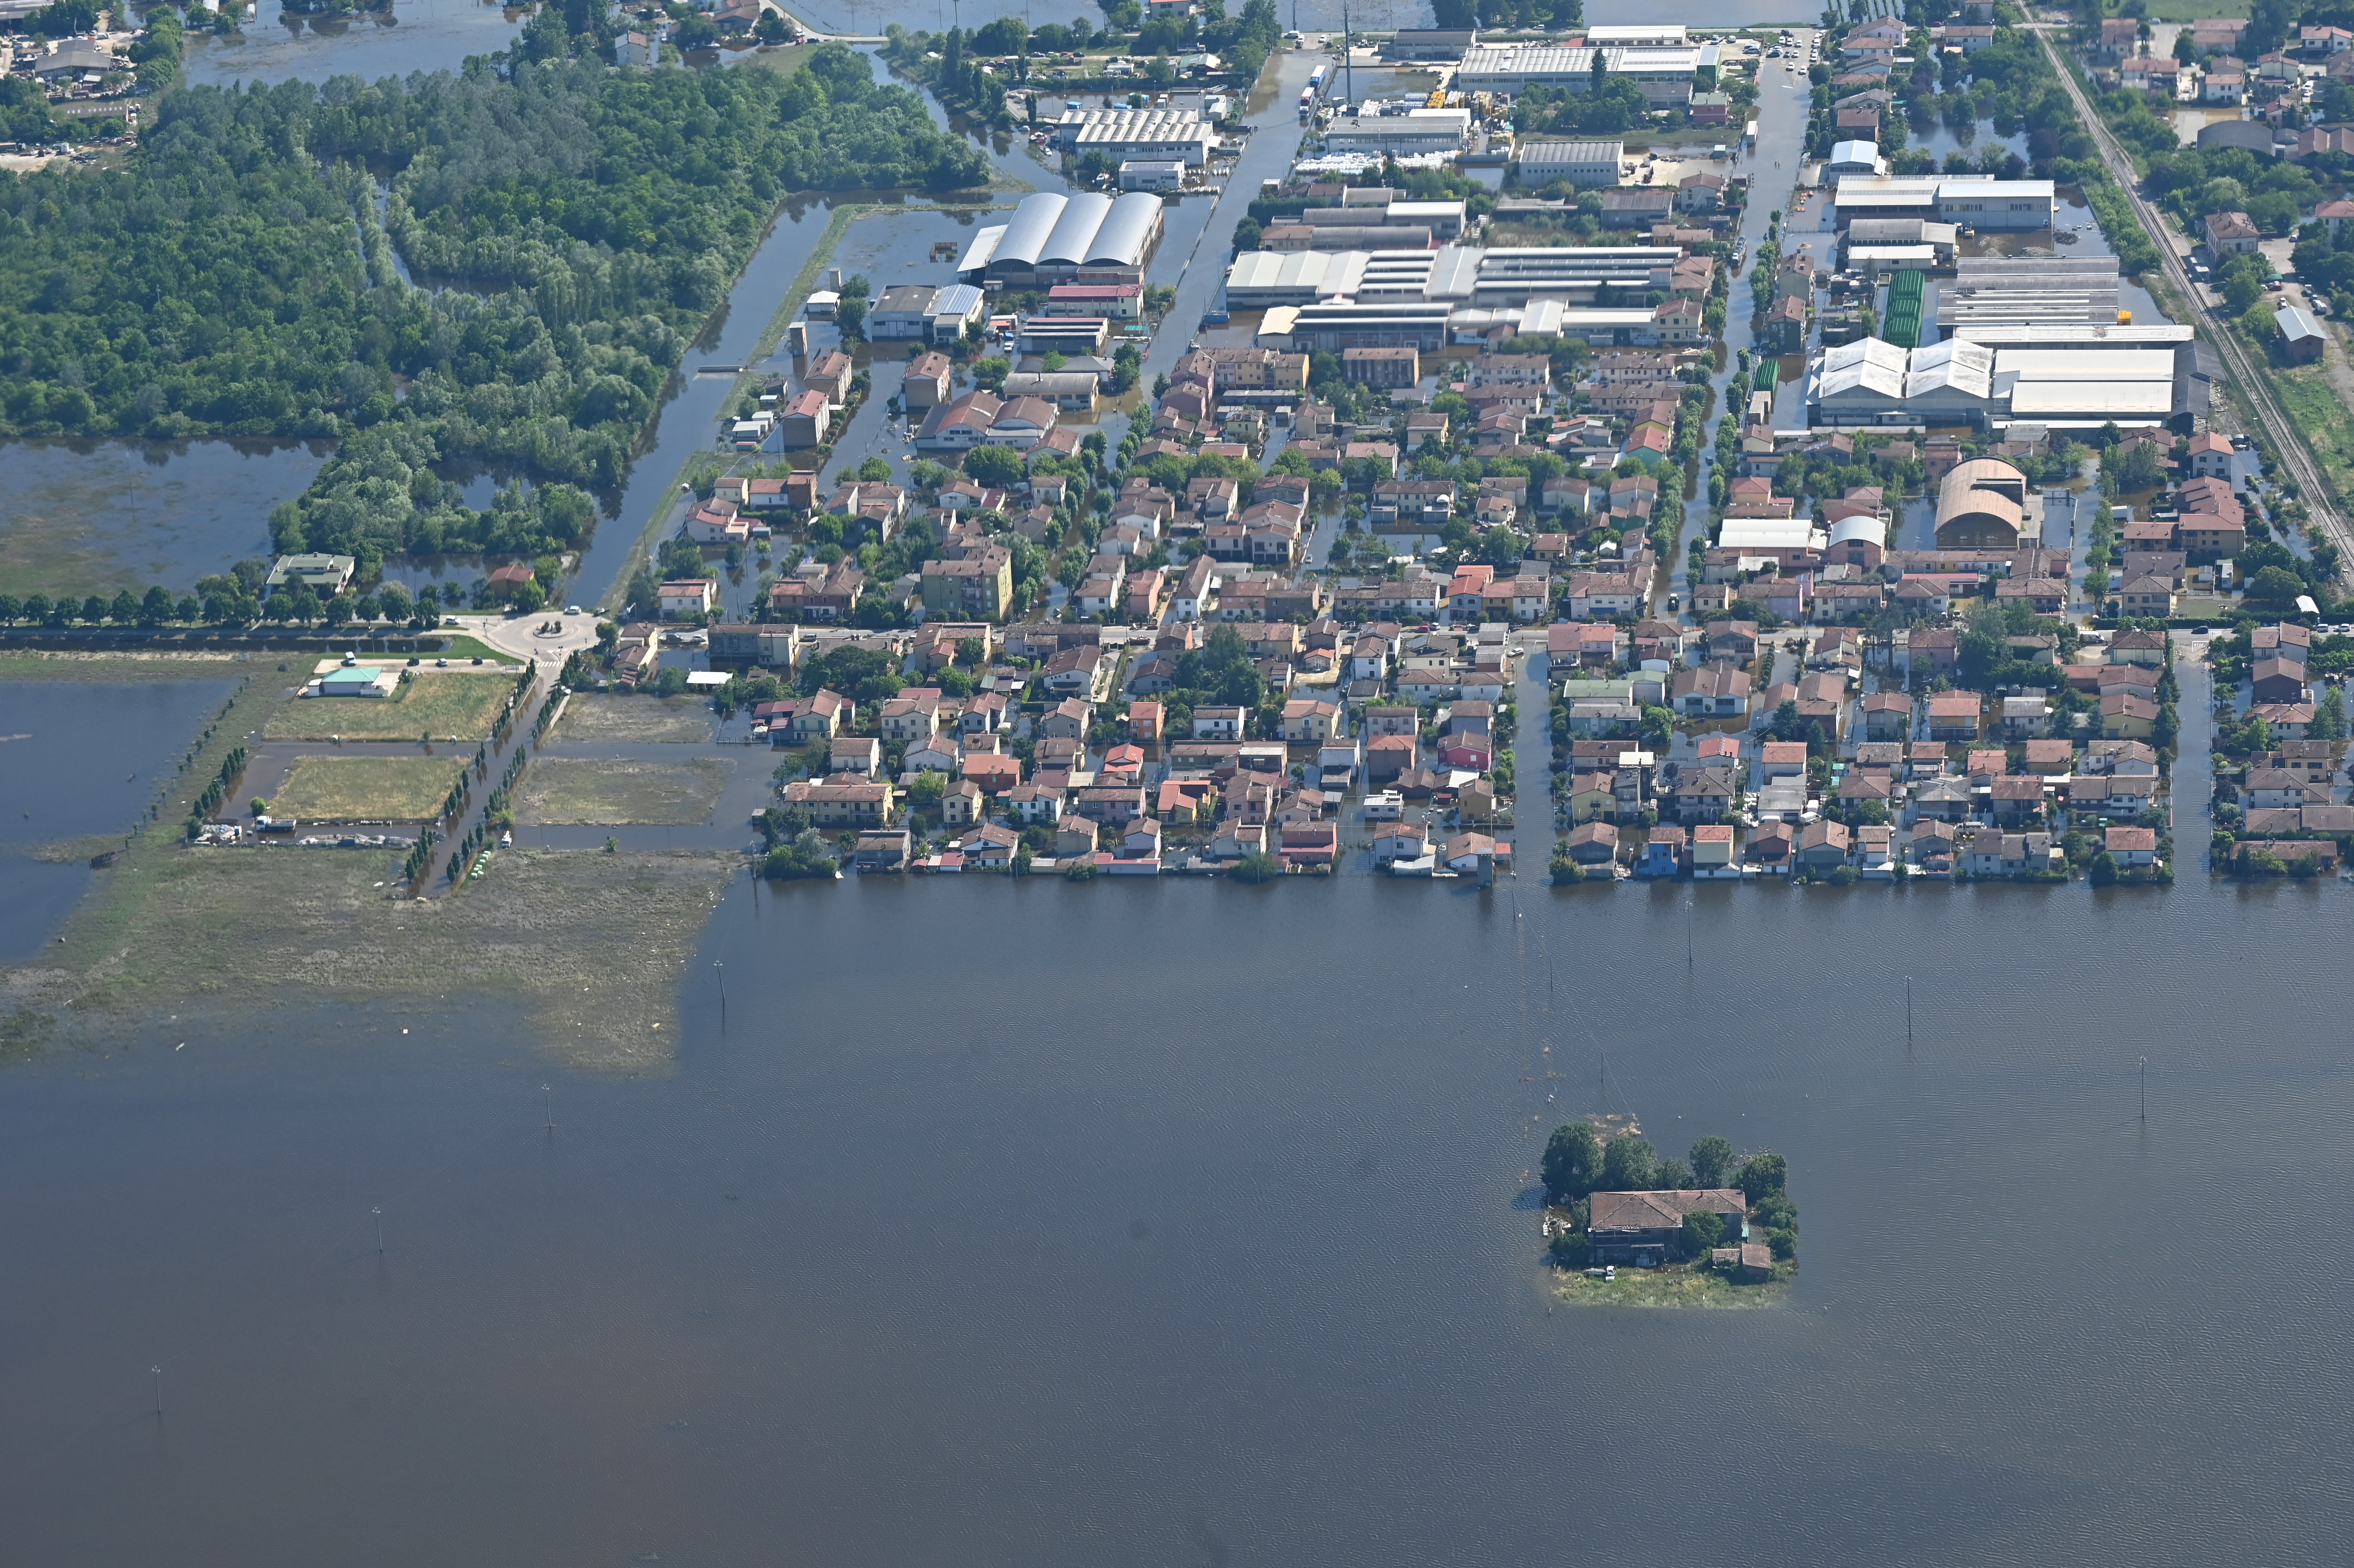 Aerial view of a flooded town in Emilia Romagna, Italy. The flood waters have surrounded the houses, leaving some completely cut off.